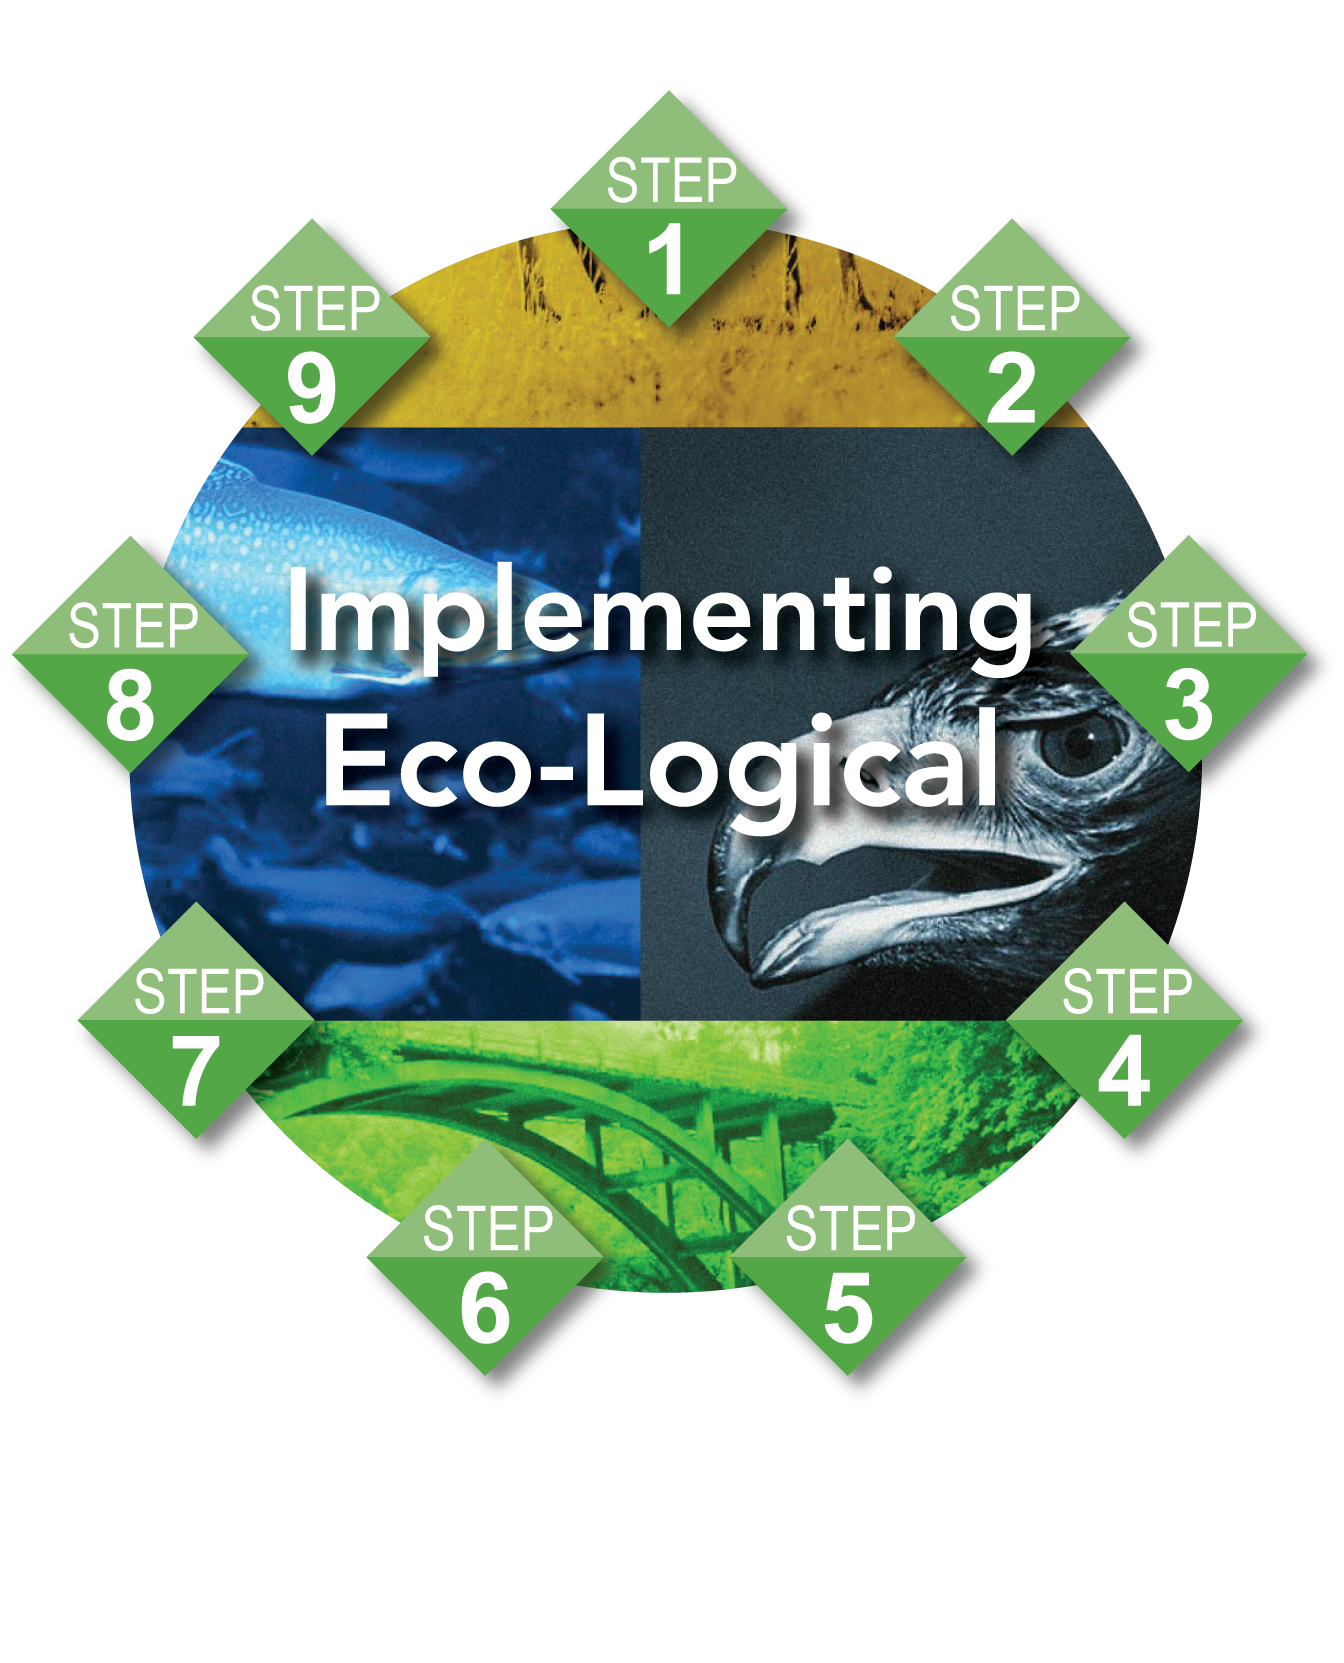 Natural Environment and Implementing Eco Logical